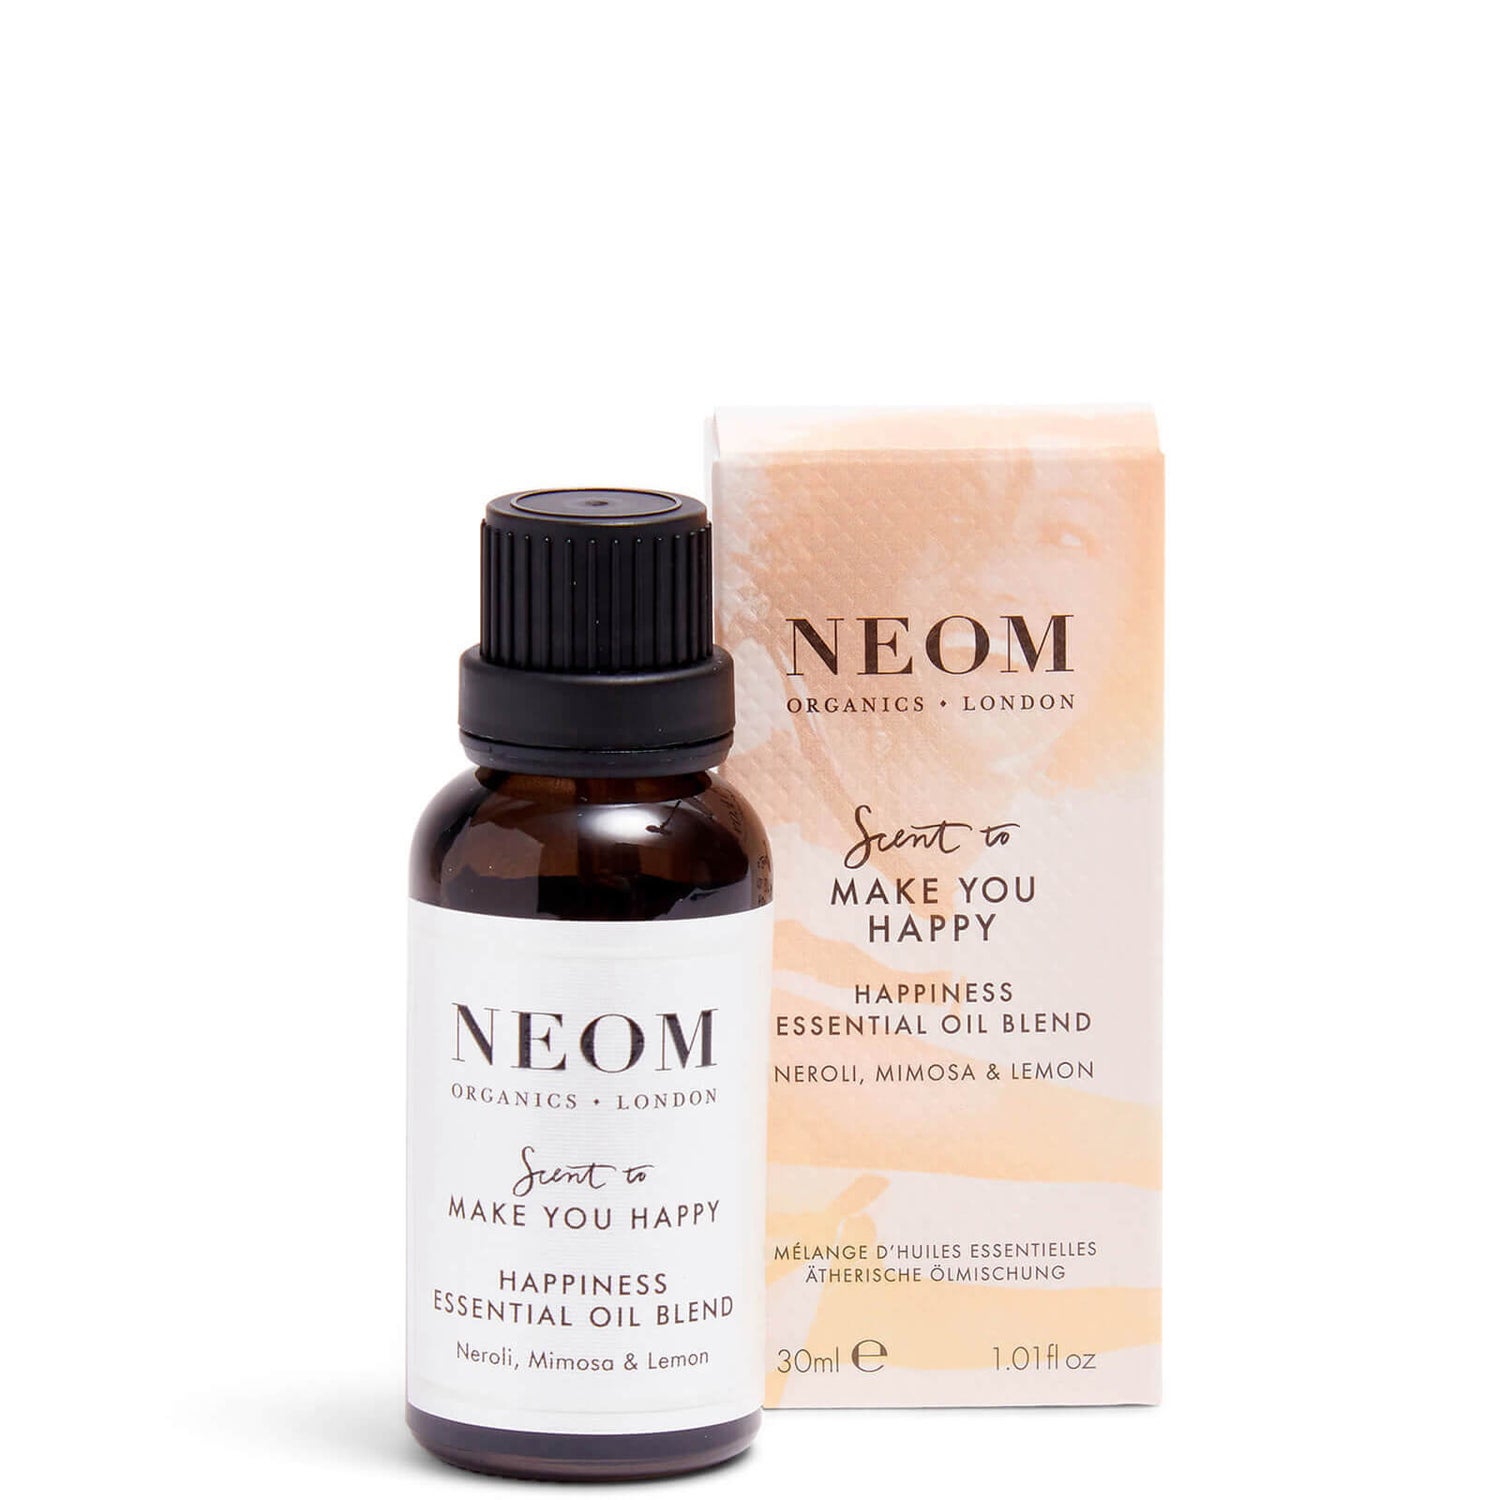 NEOM Happiness Essential Oil Blend 30ml (Worth $66.00)